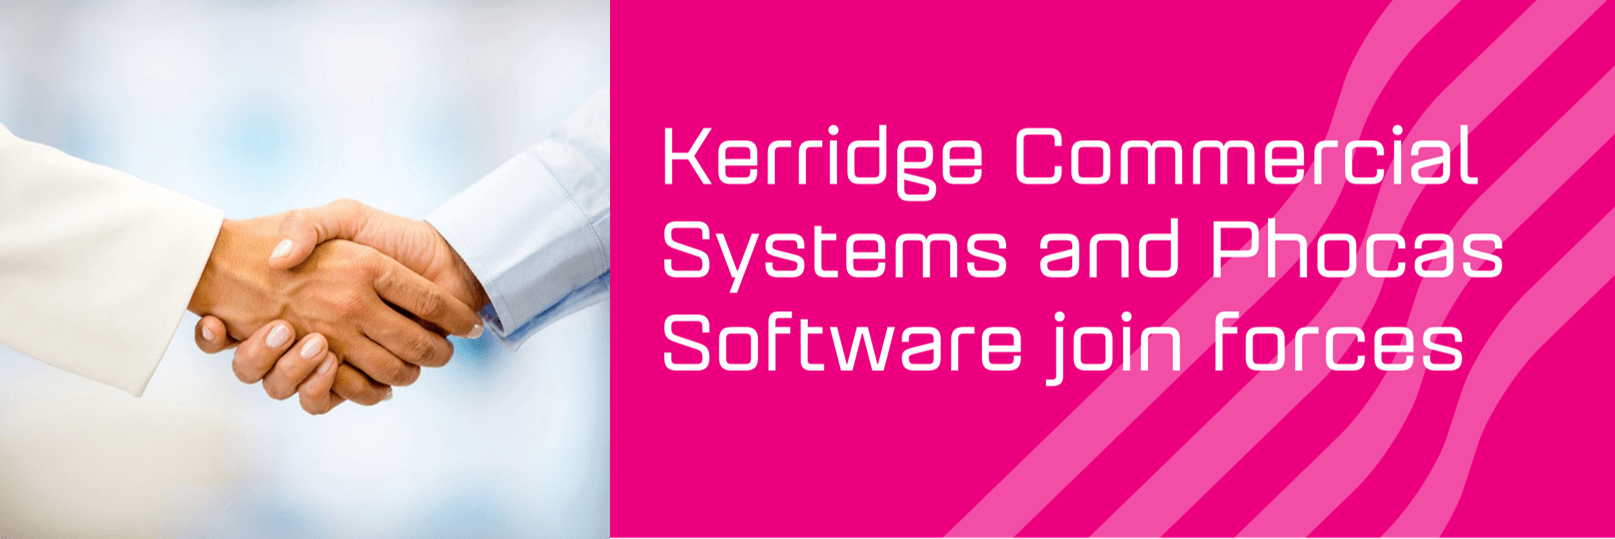 Kerridge Commercial Systems and Phocas Software join forces to enable distributive trades to feel good about data